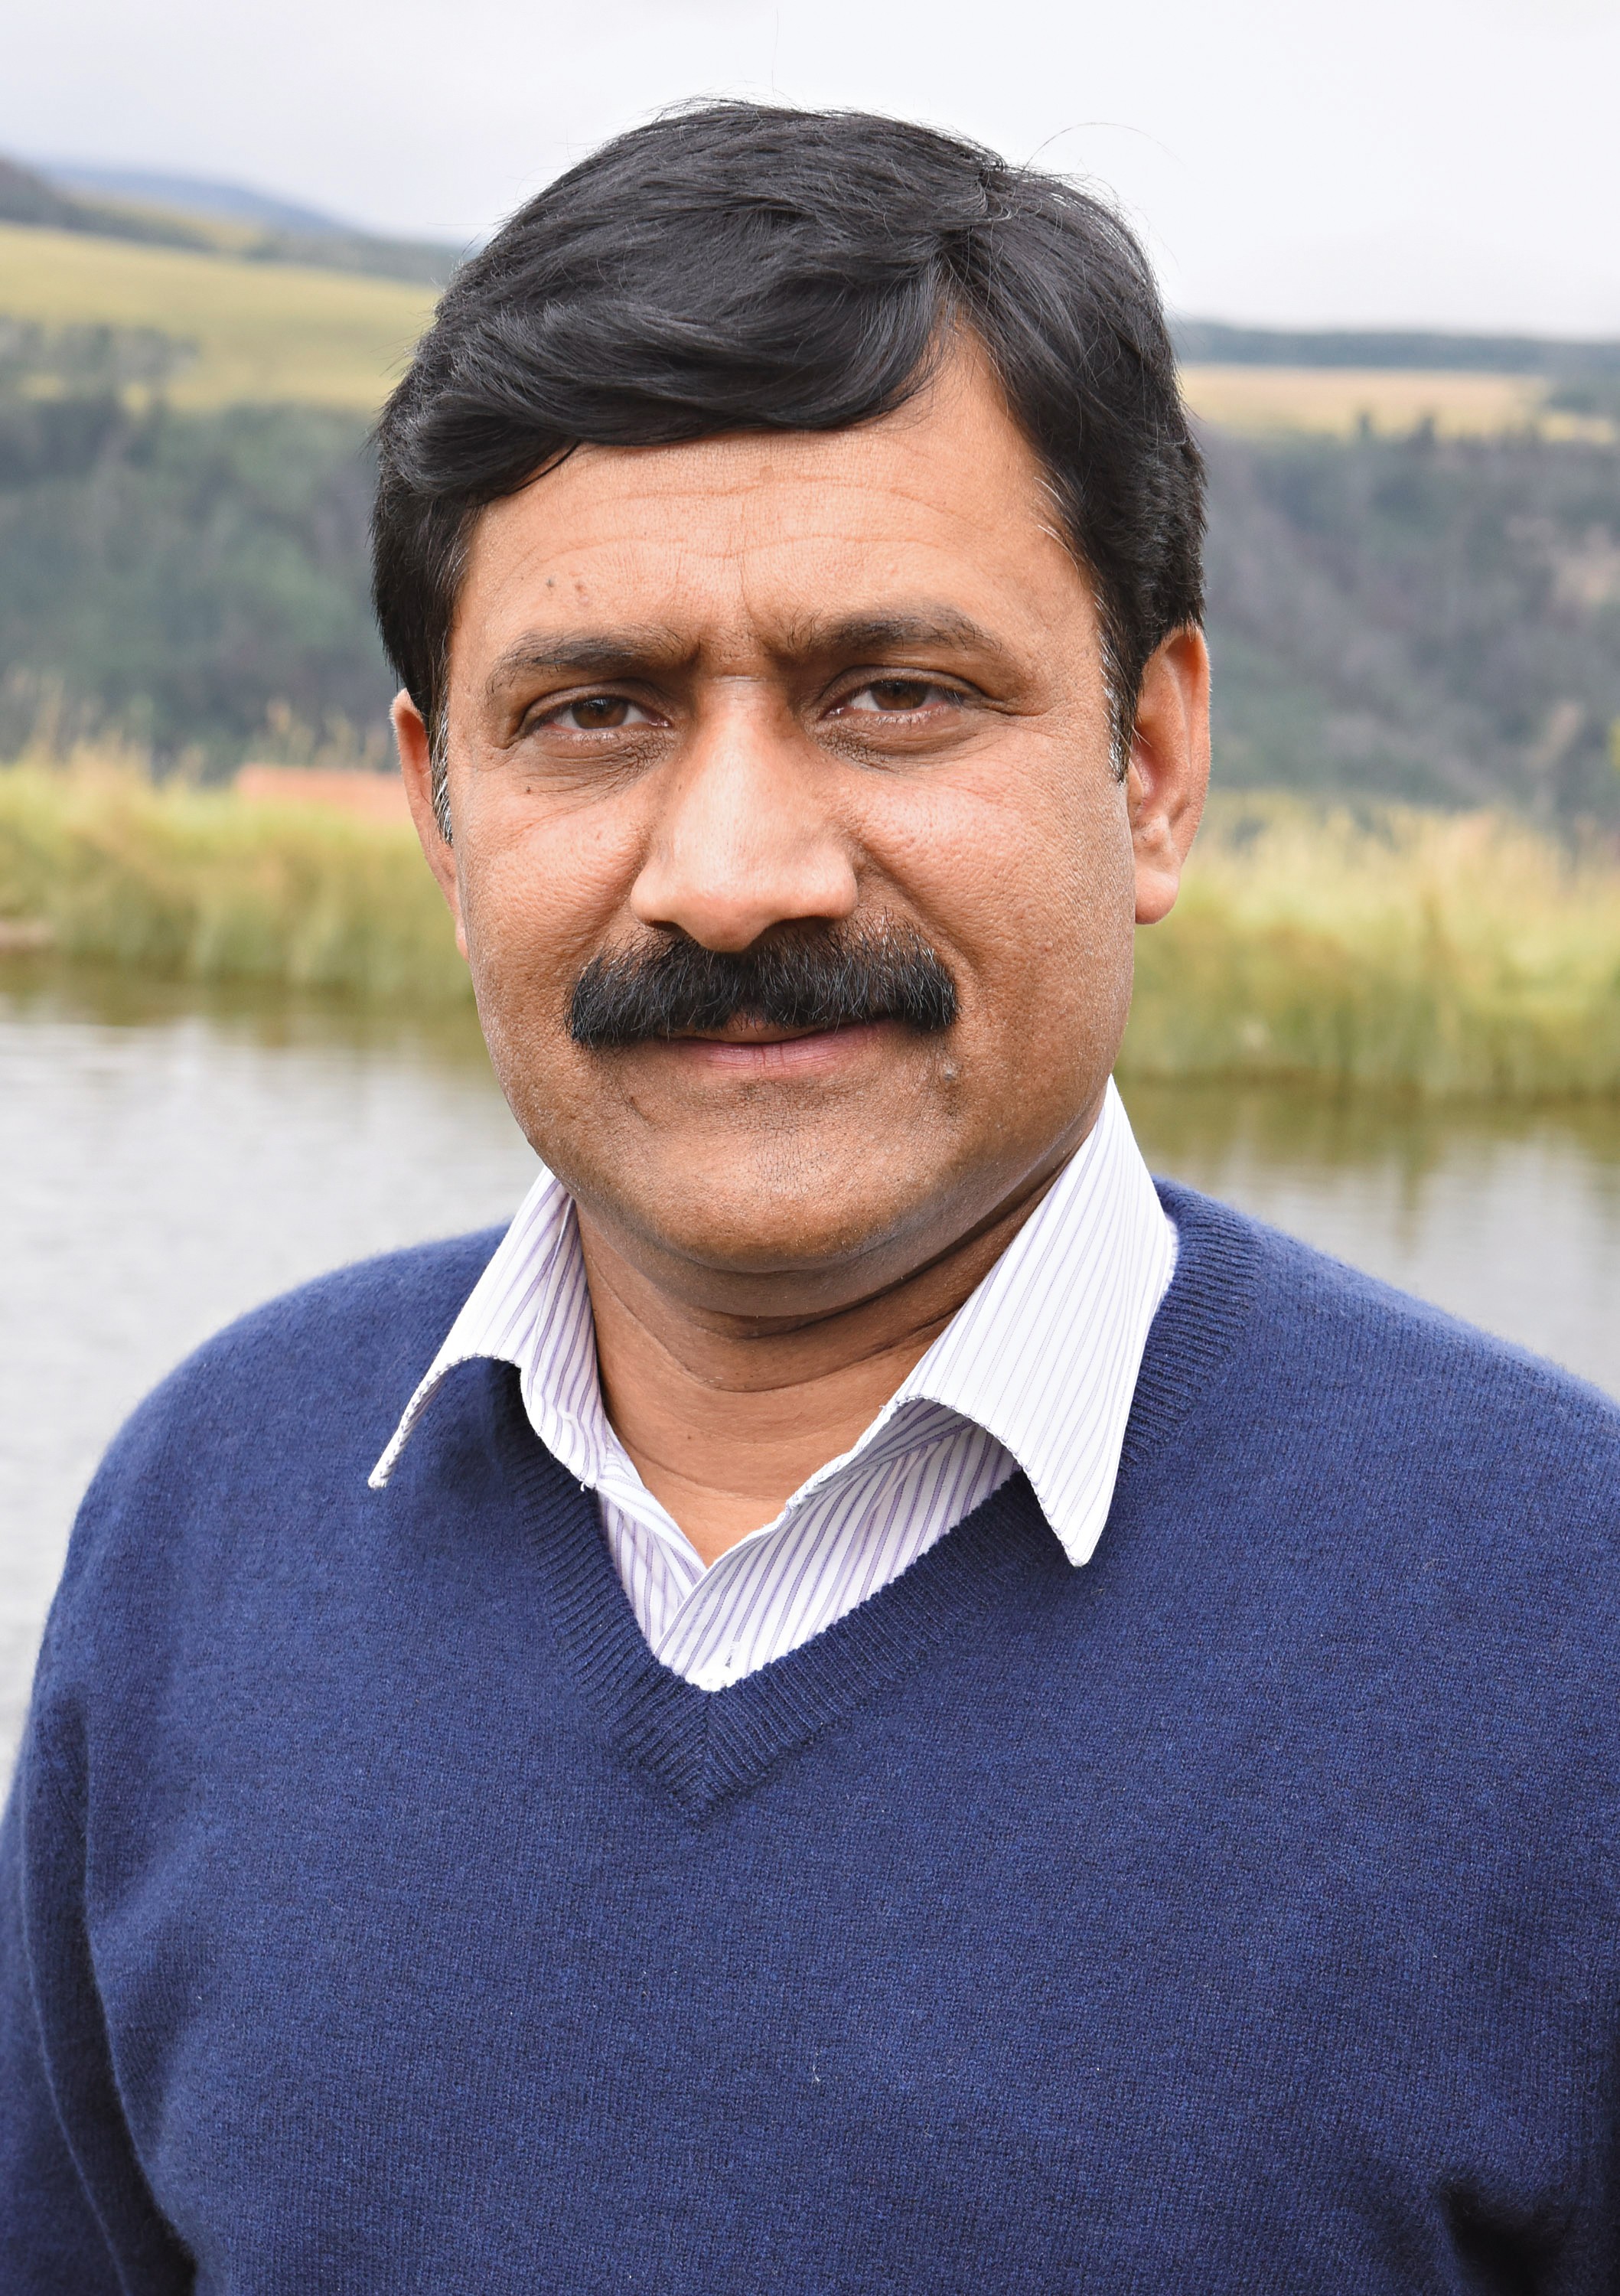 TELLURIDE, CO - SEPTEMBER 04:  (EXCLUSIVE COVERAGE) Ziauddin Yousafzai speaks attends the 2015 Telluride Film Festival on September 4, 2015 in Telluride, Colorado.  (Photo by Vivien Killilea/Getty Images) (Foto: Getty Images)